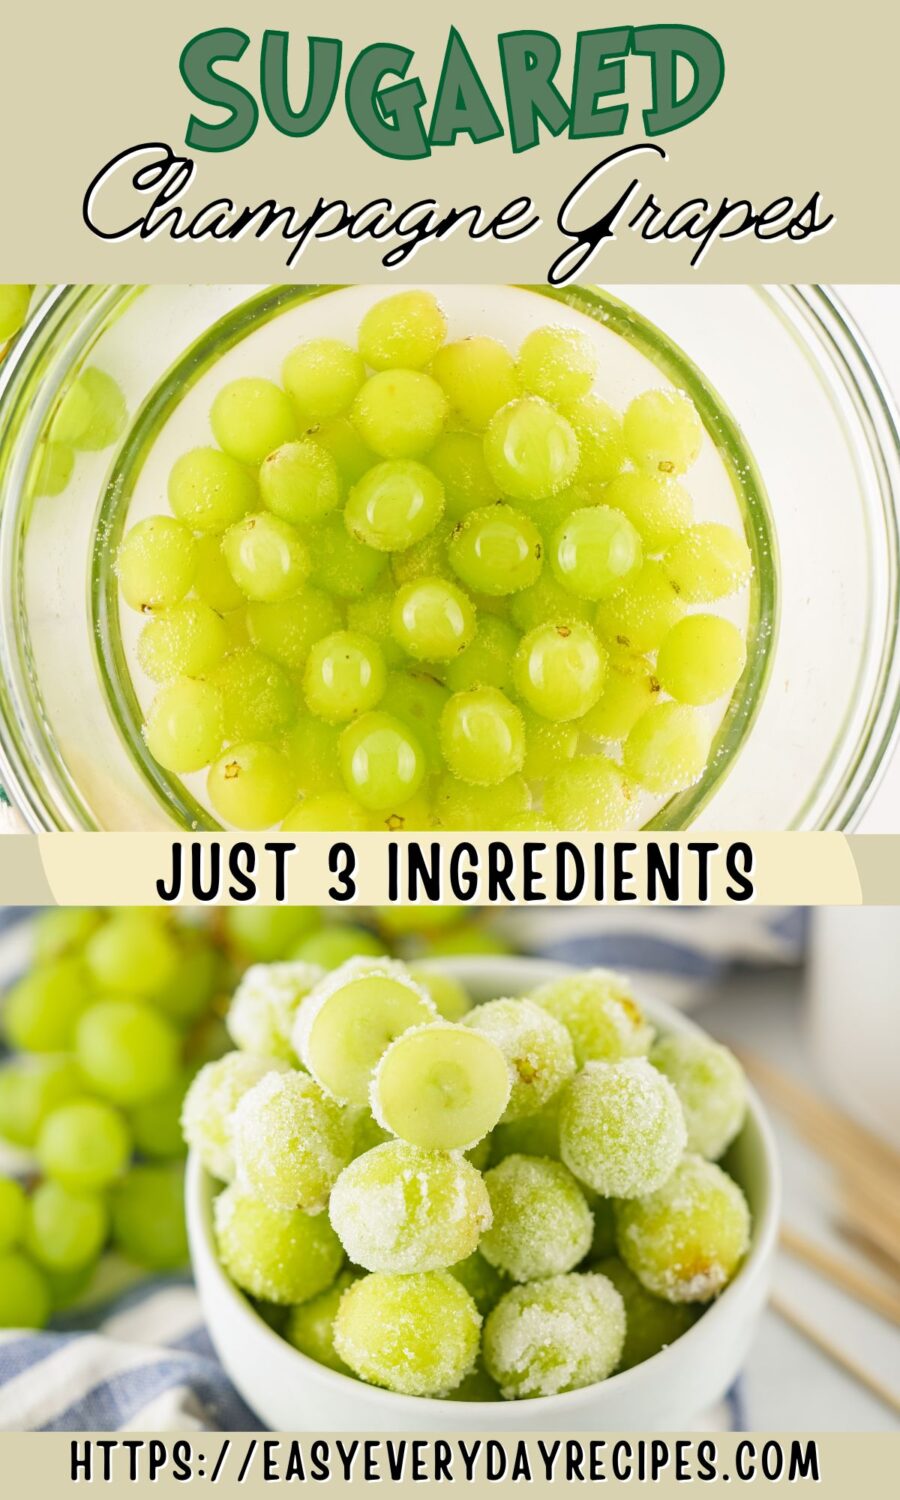 Sugared champagne grapes just 3 ingredients.